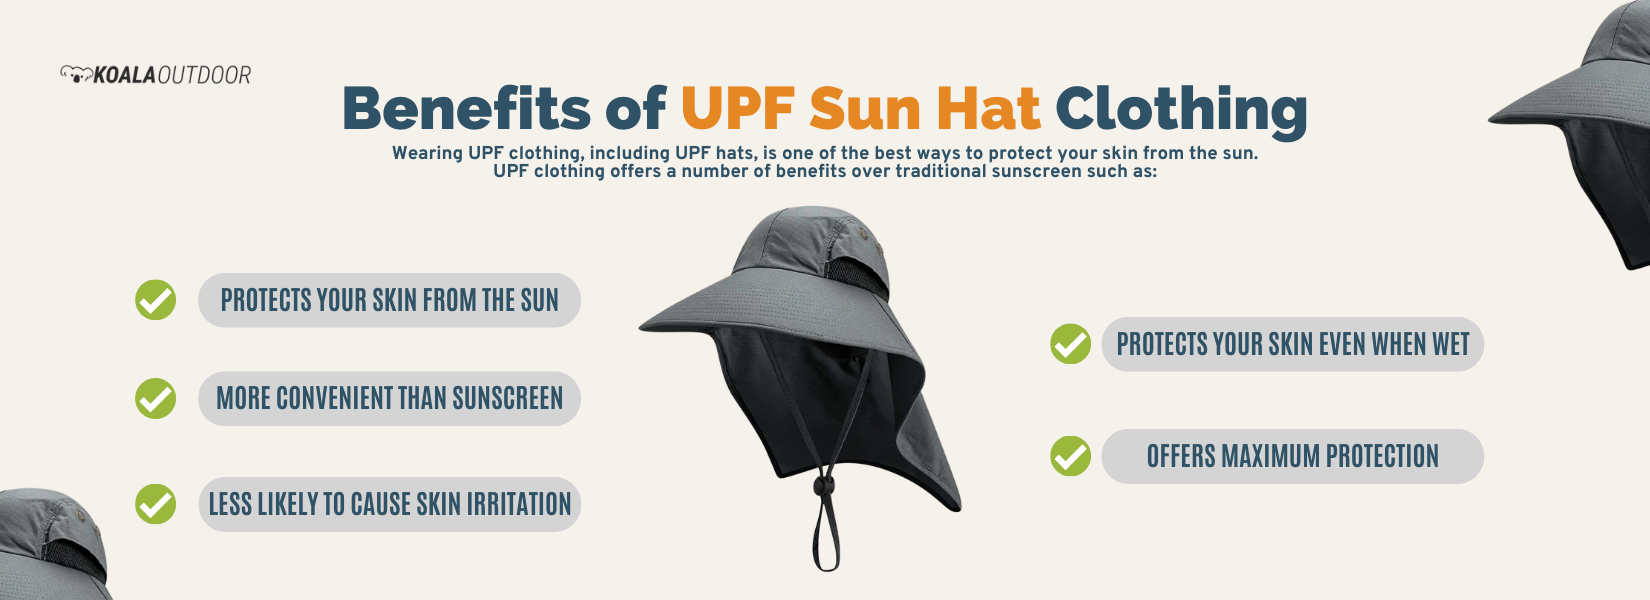 What To Look For In a Sun Protection Hat